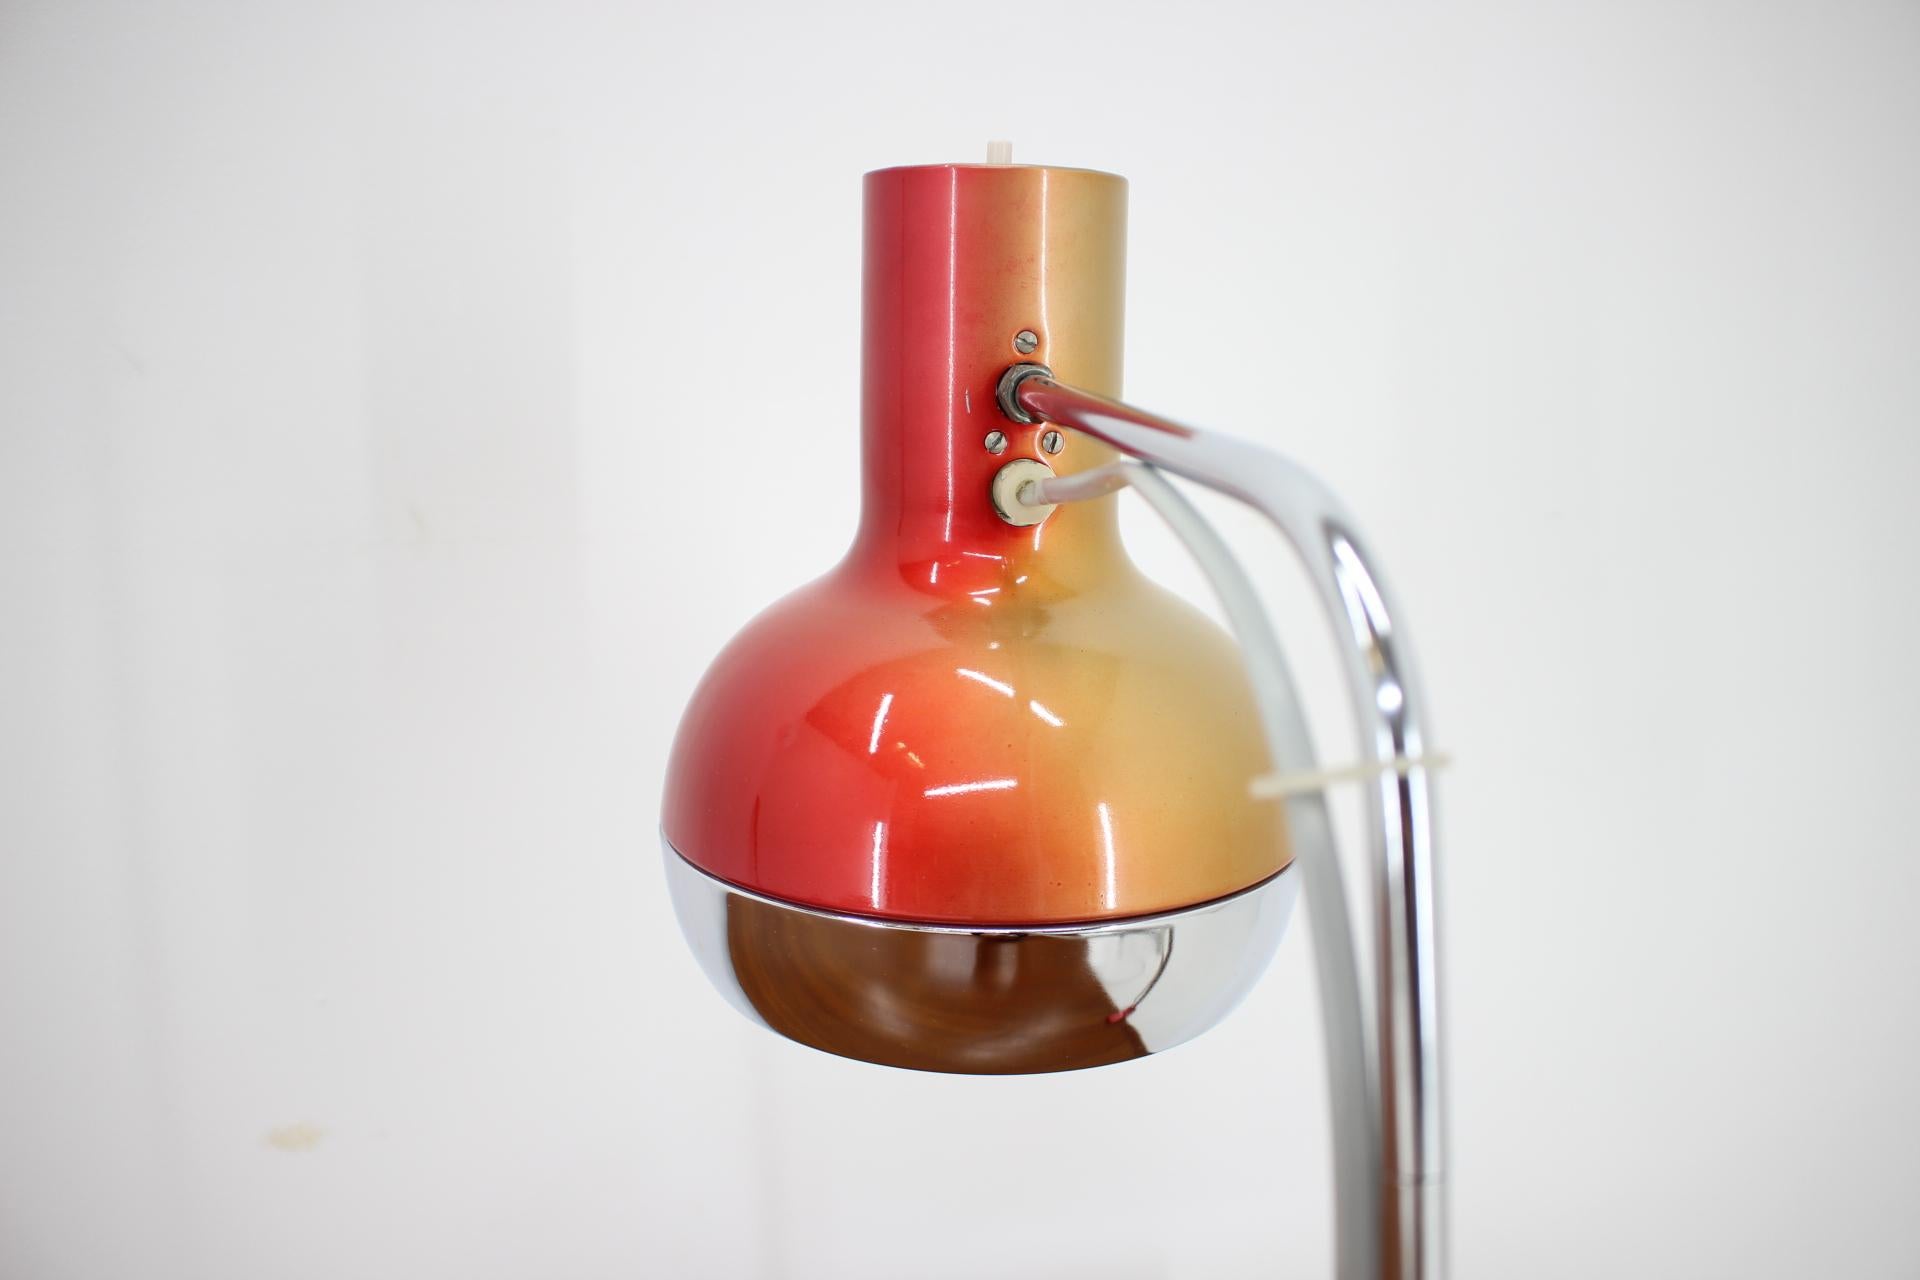 Czech Midcentury Table Lamp Designed by Josef Hůrka for Napako, 1970s For Sale